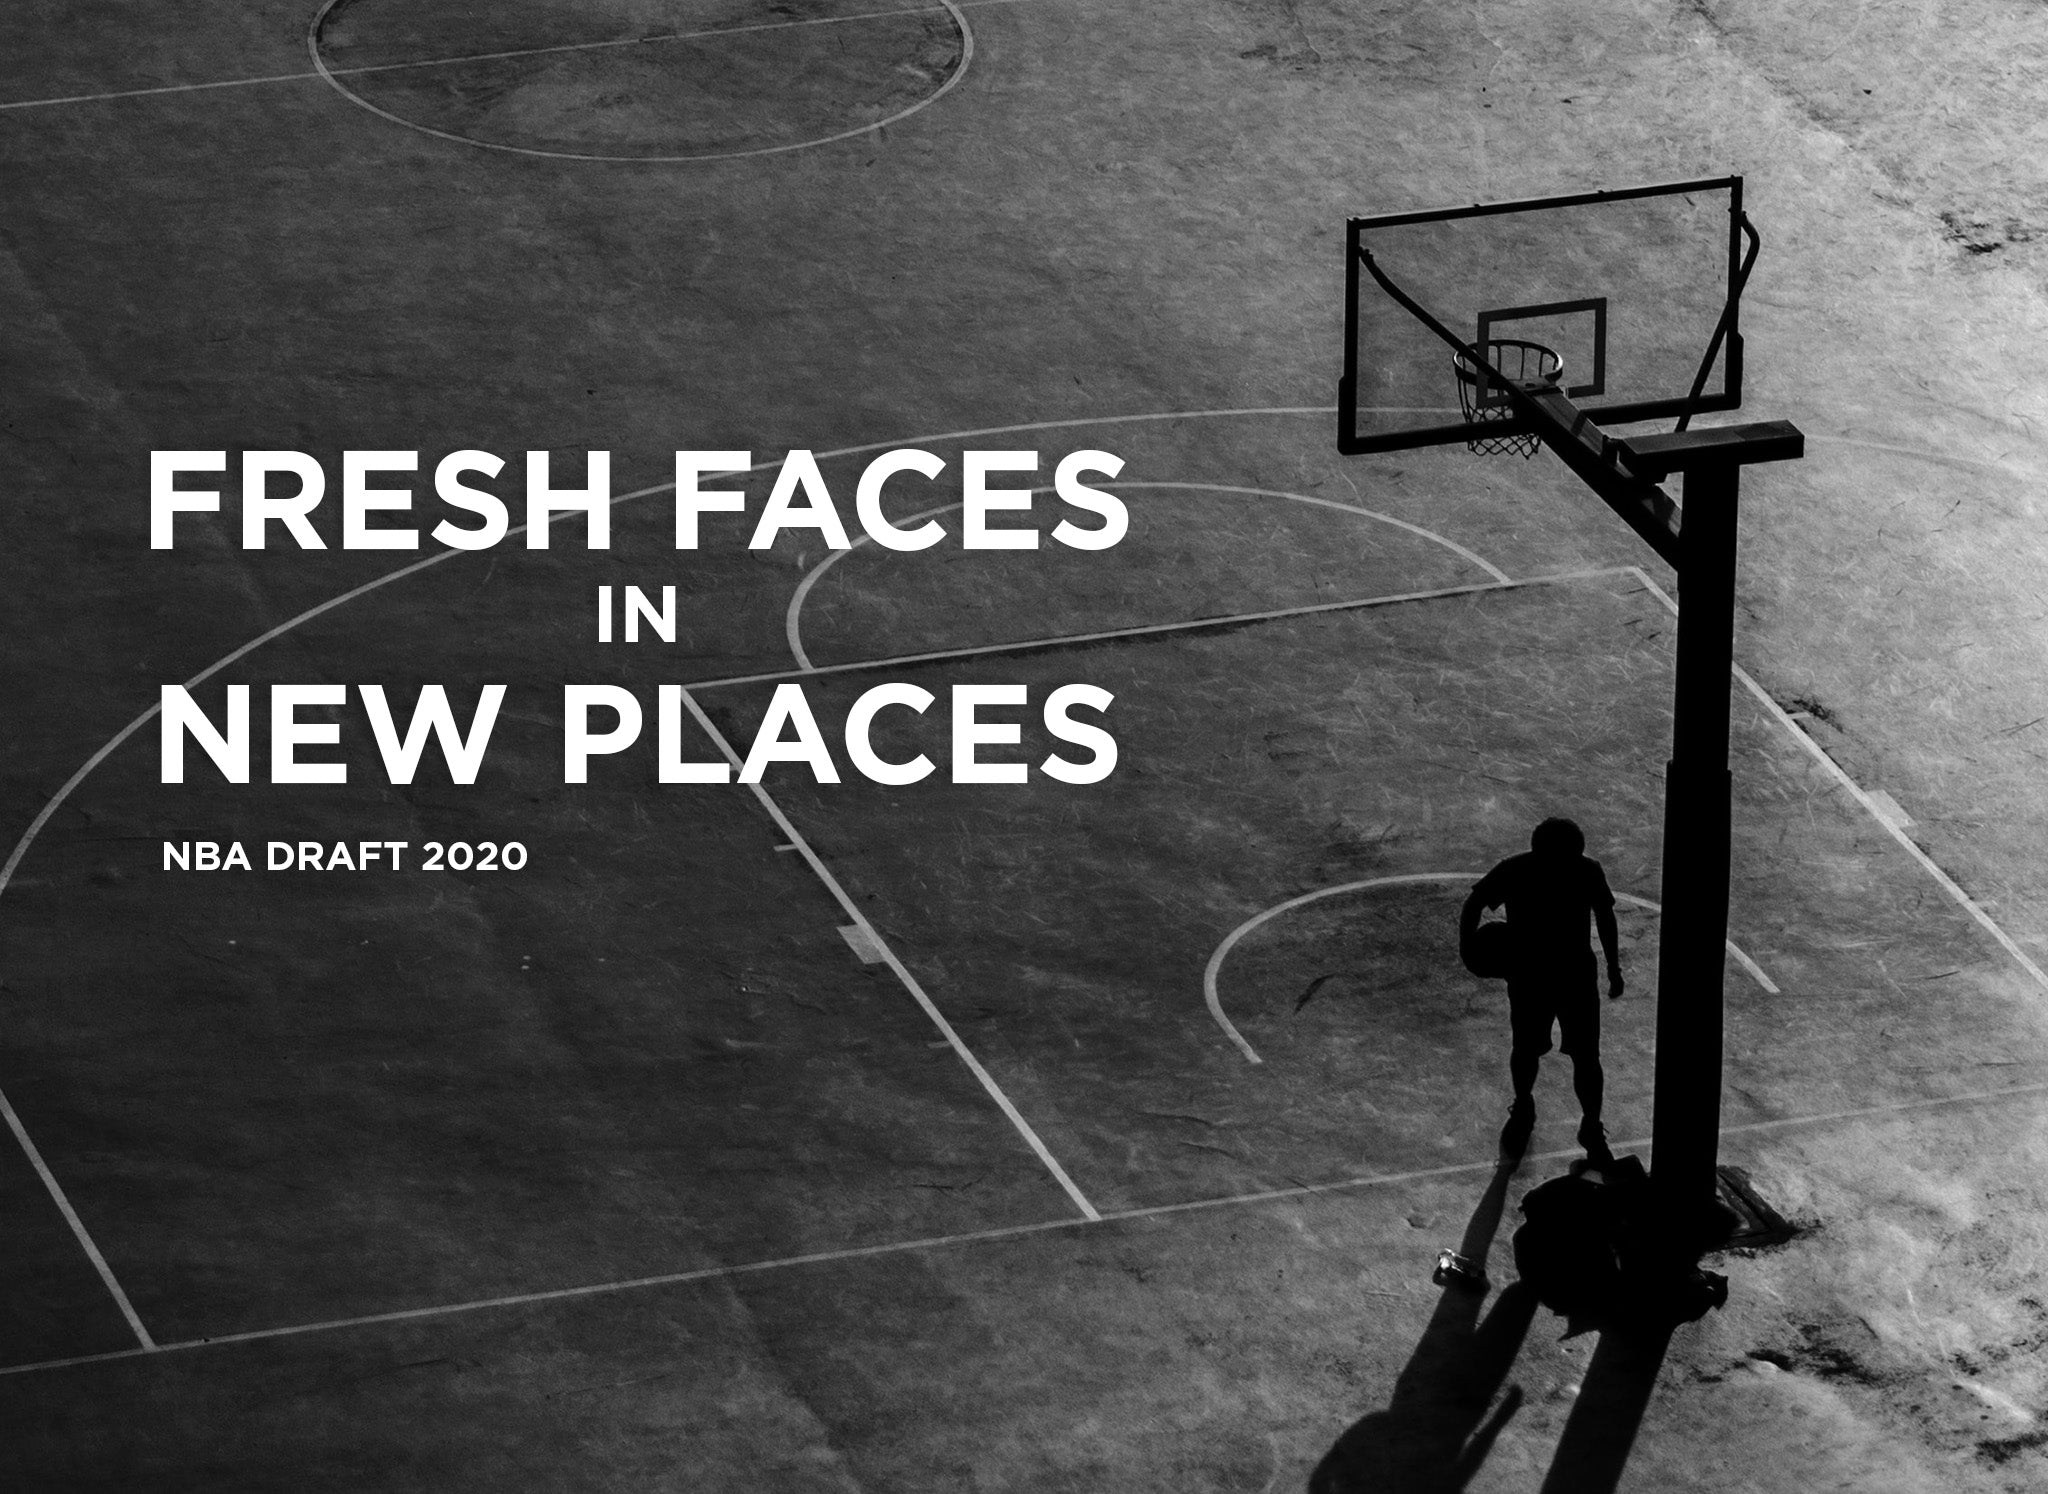 Fresh Faces in New Places